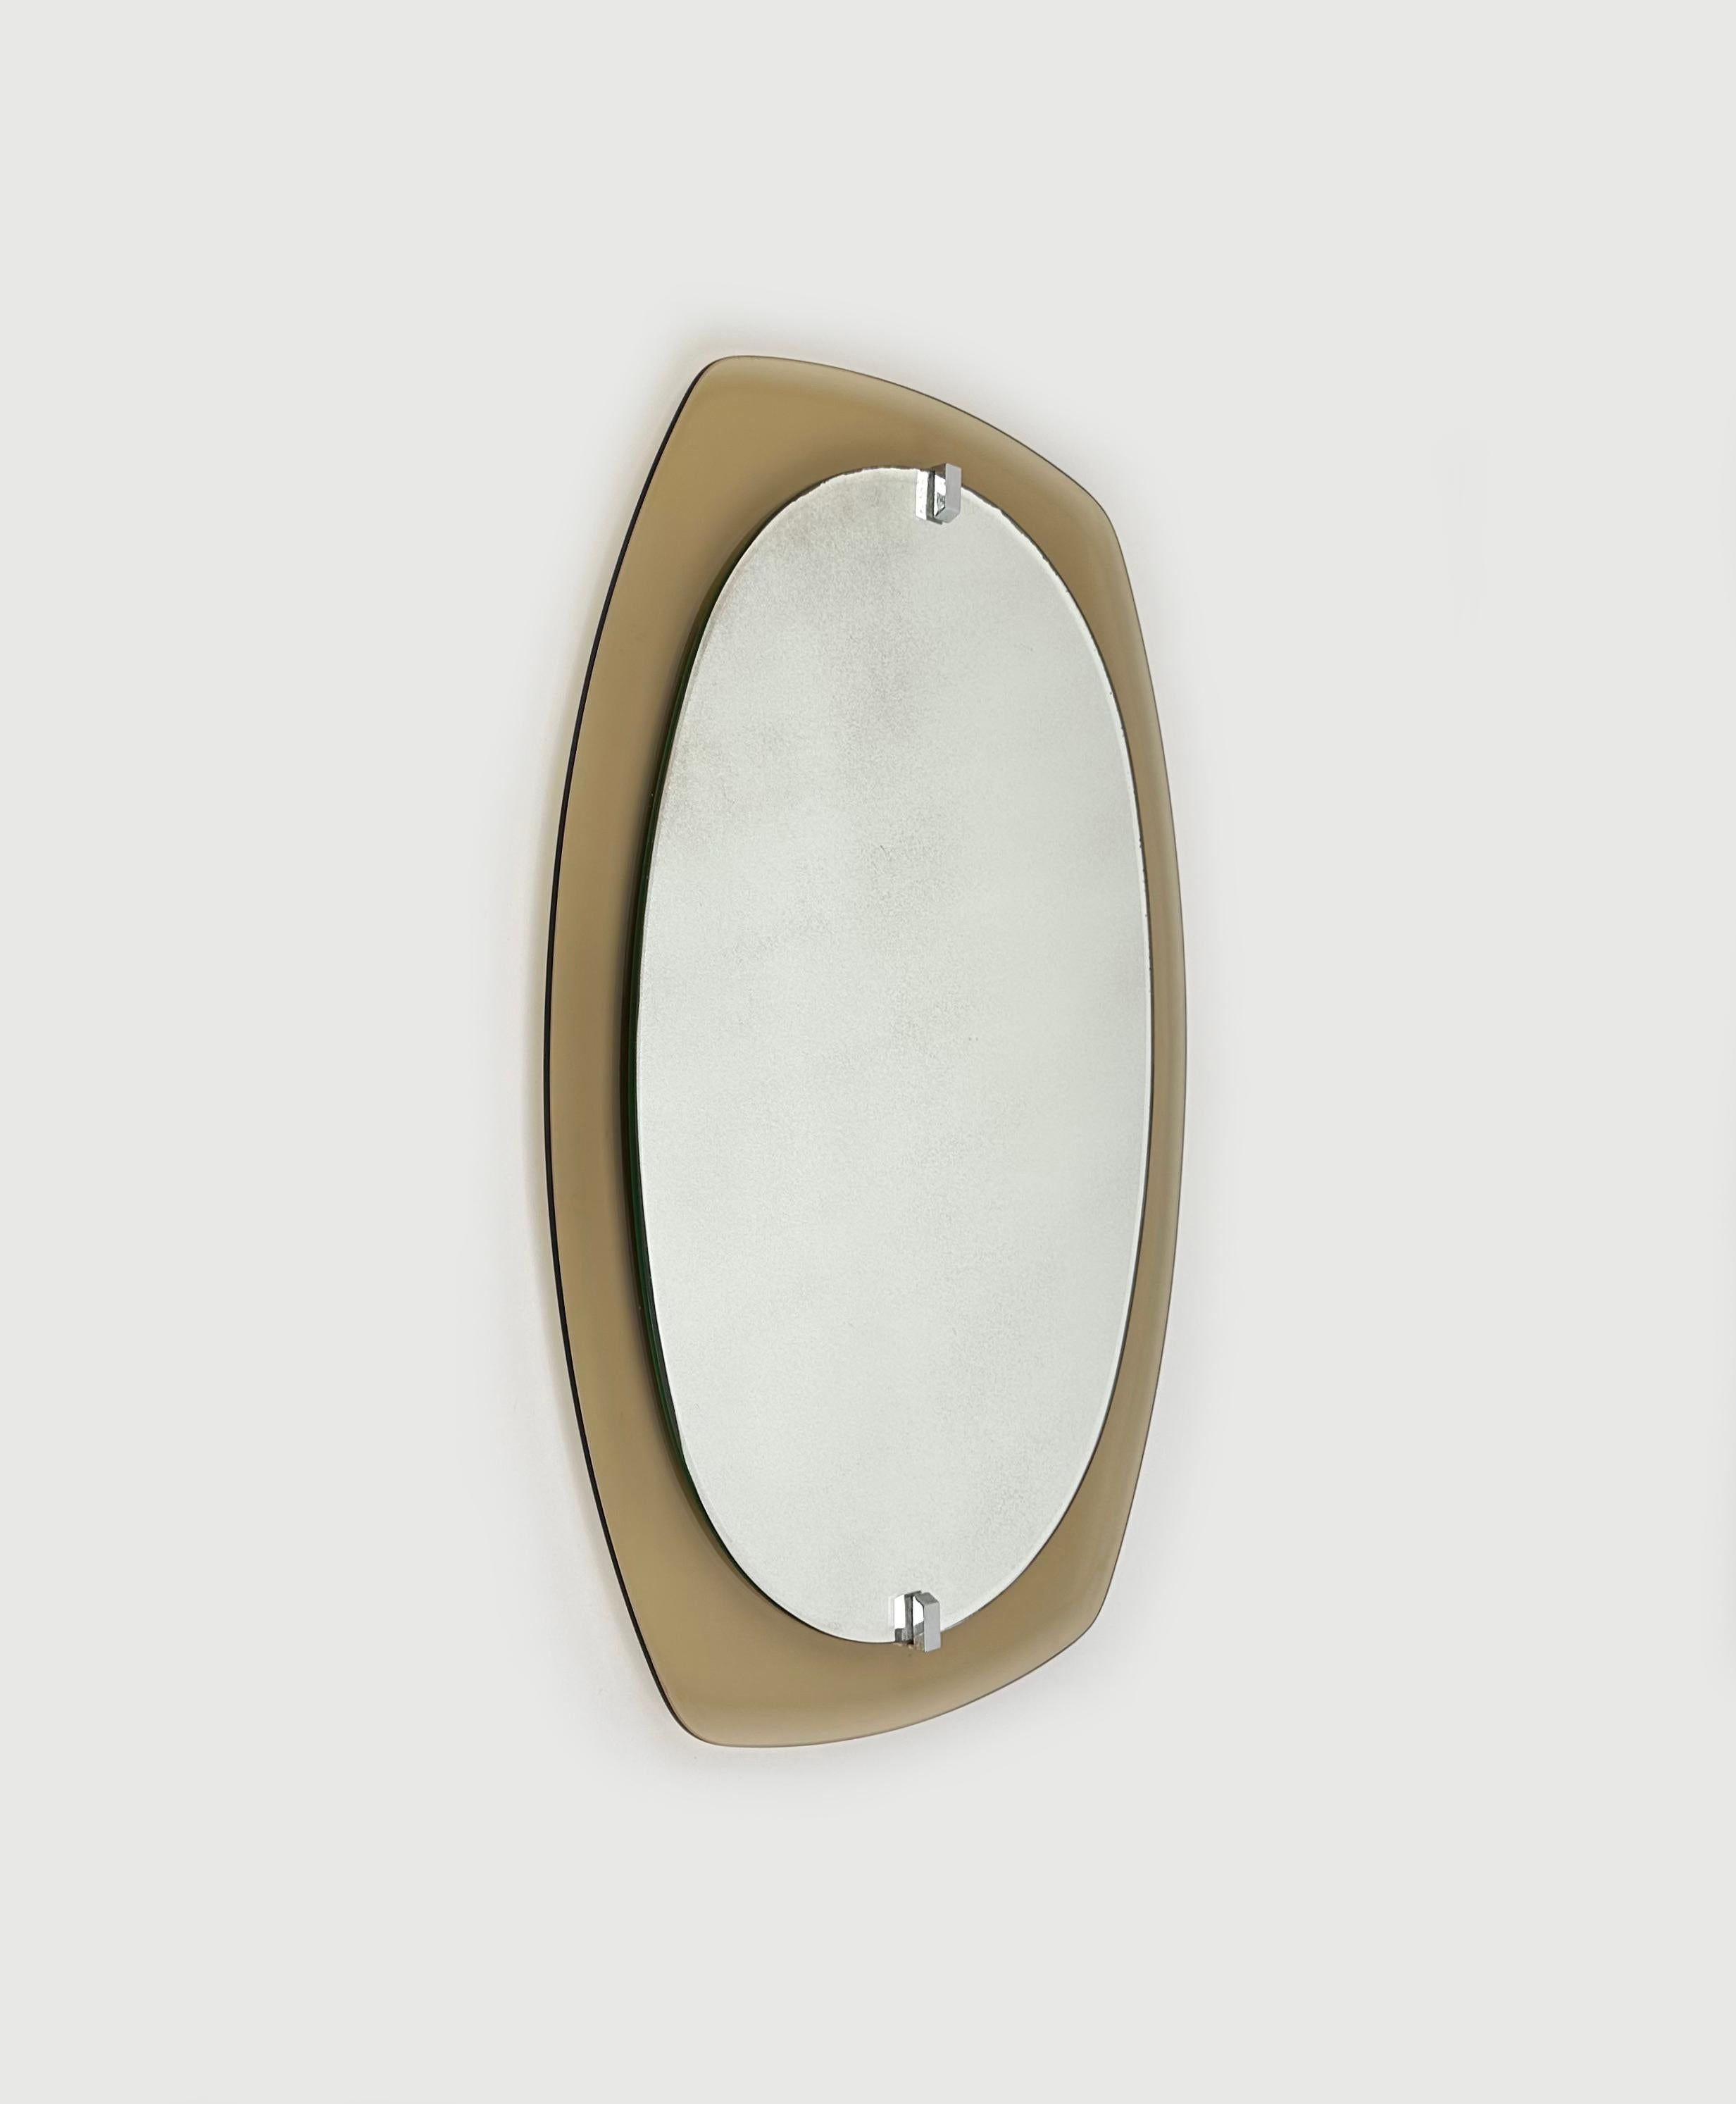 Midcentury Wall Mirror Beveled Smoked Glass Frame by Veca, Italy 1970s For Sale 1